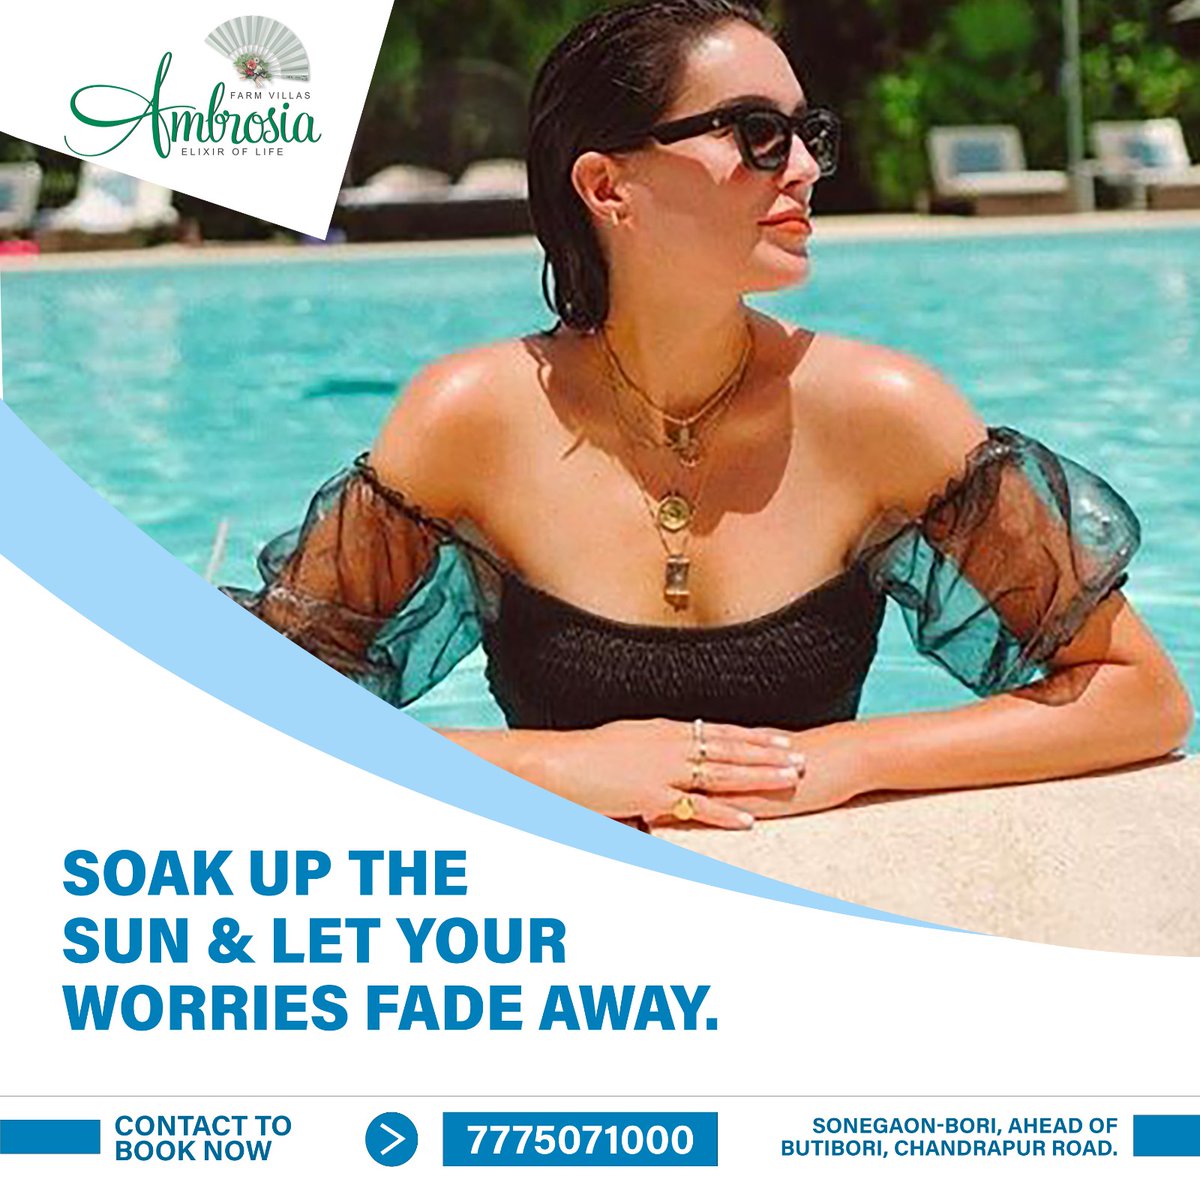 Unwind in our #serene surroundings and embrace the soothing vibes of our eco-friendly #haven.
Relax, #rejuvenate, and create unforgettable memories.
Book your escape today and experience pure #bliss

Contact
7775071000

#summervibes #waterfun #poolsideparadise #chillvibes #chill